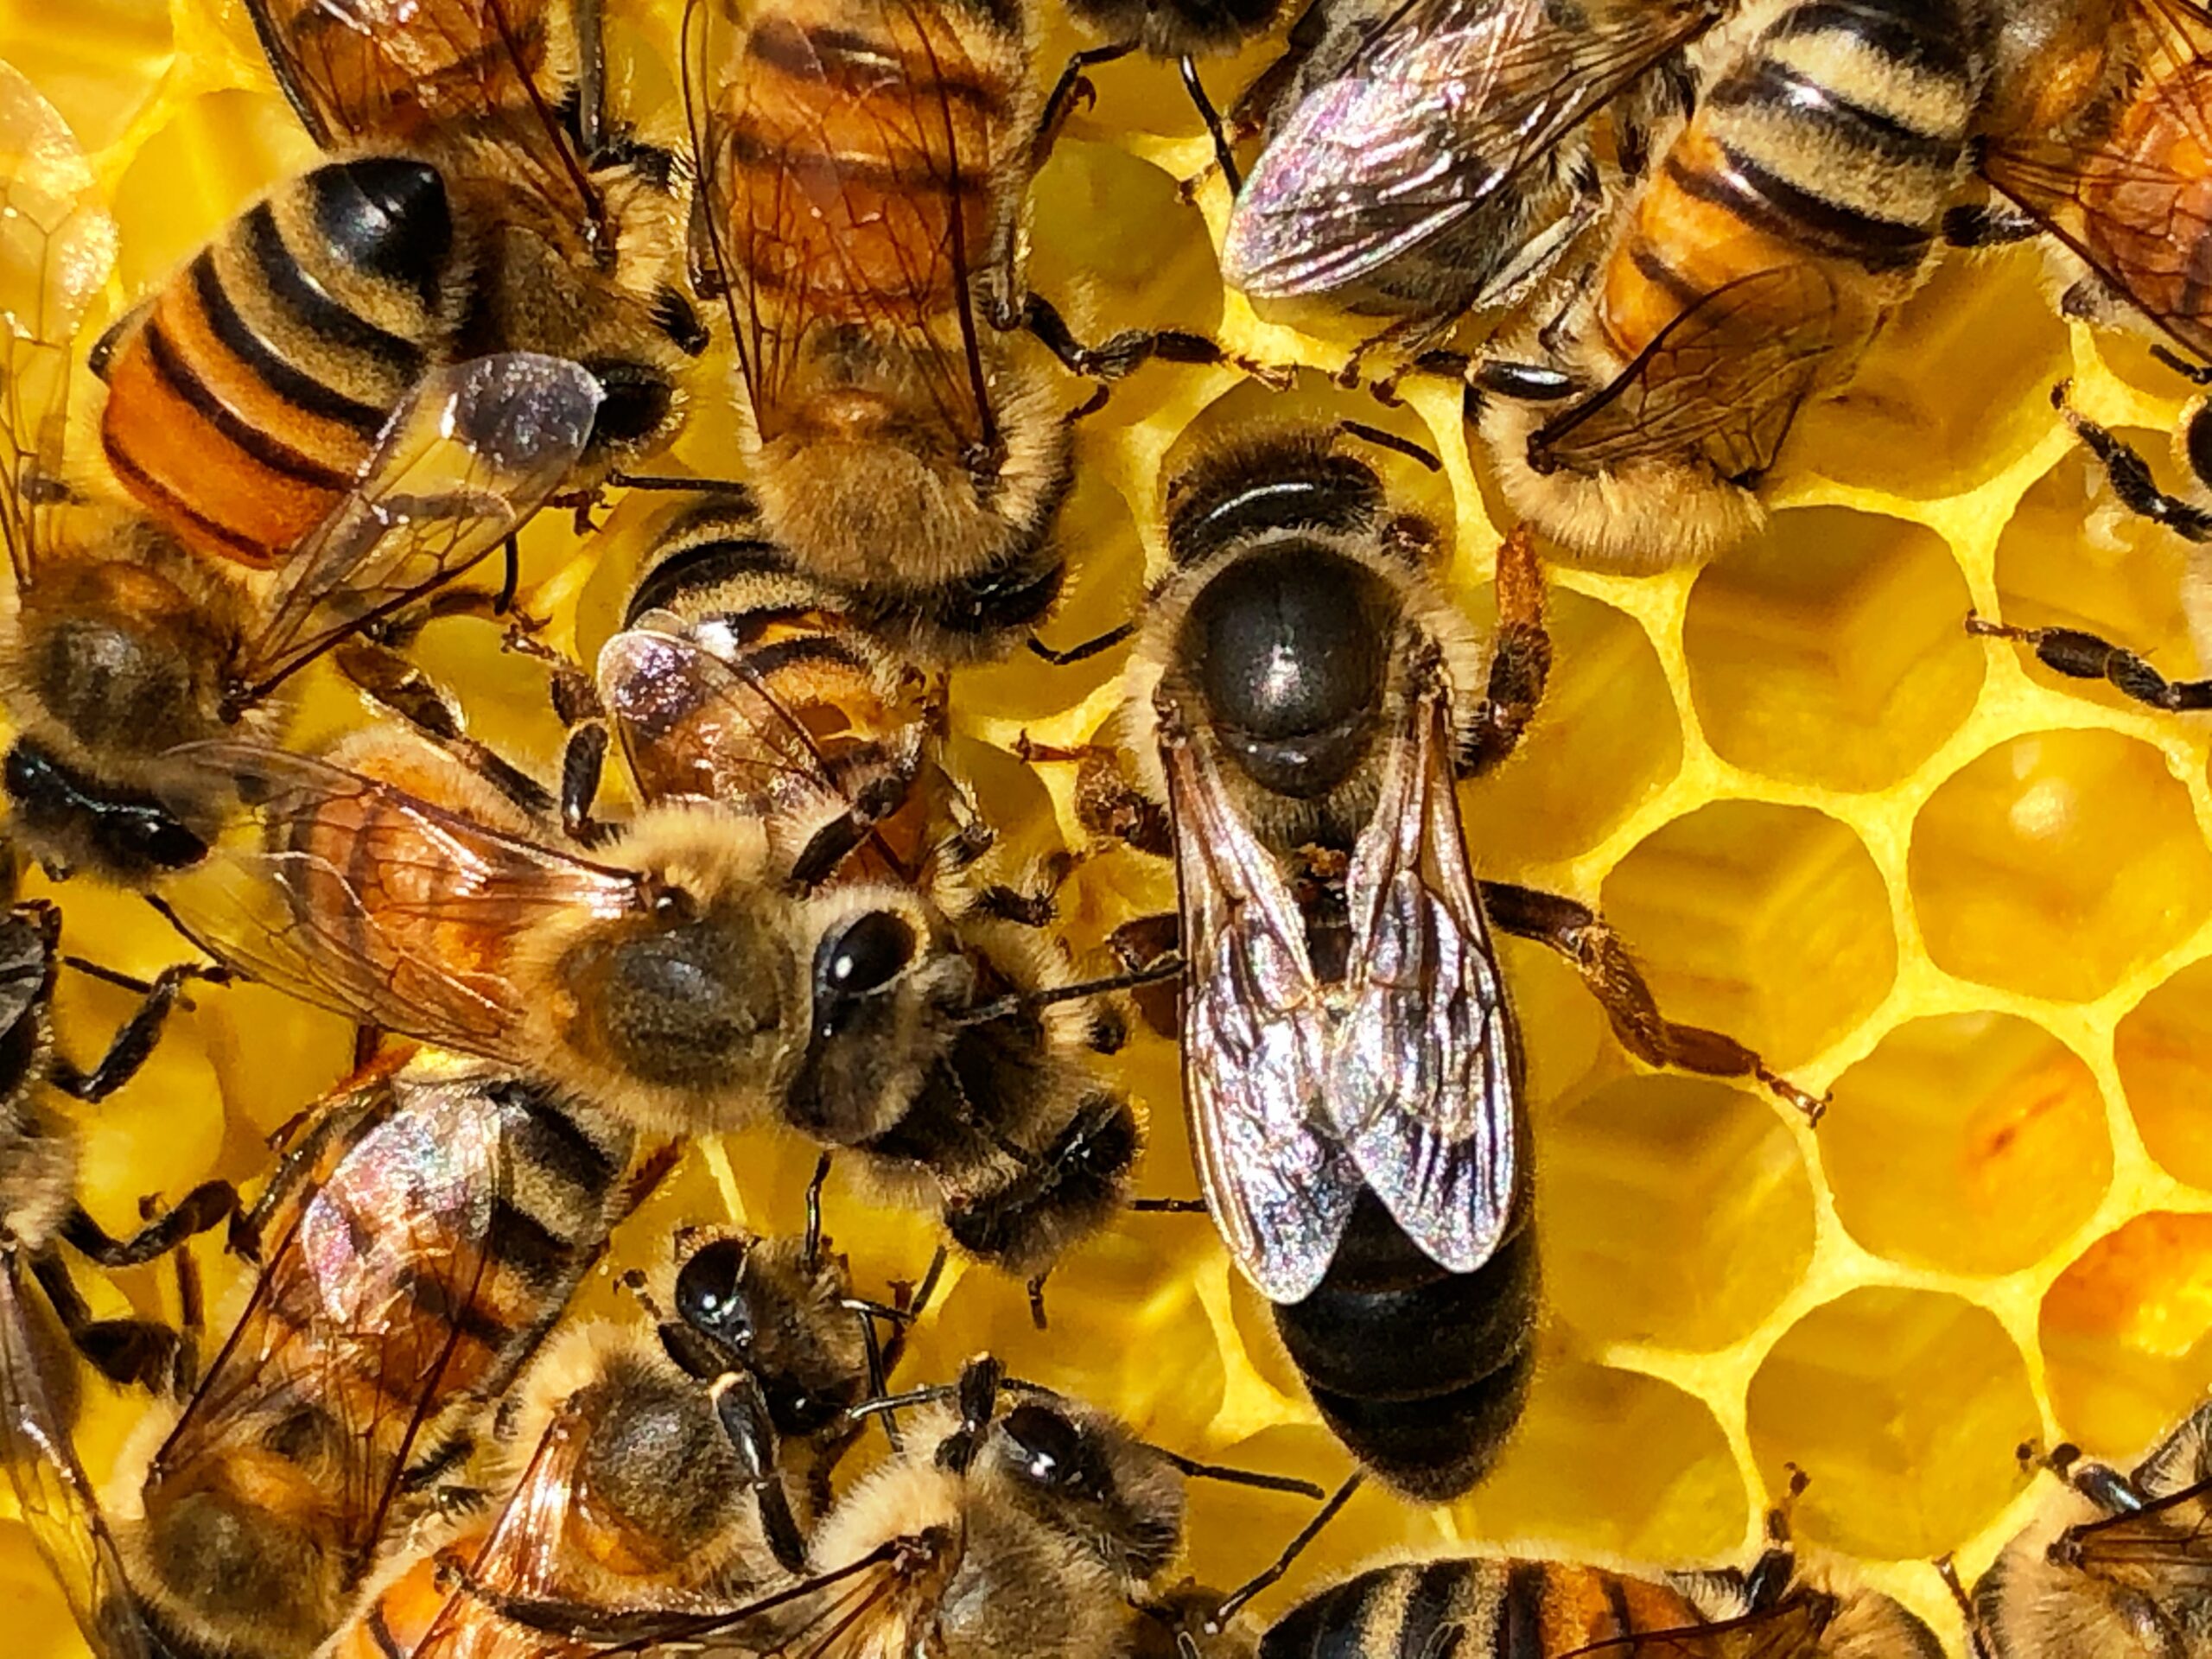 A queen bee surrounded by workers